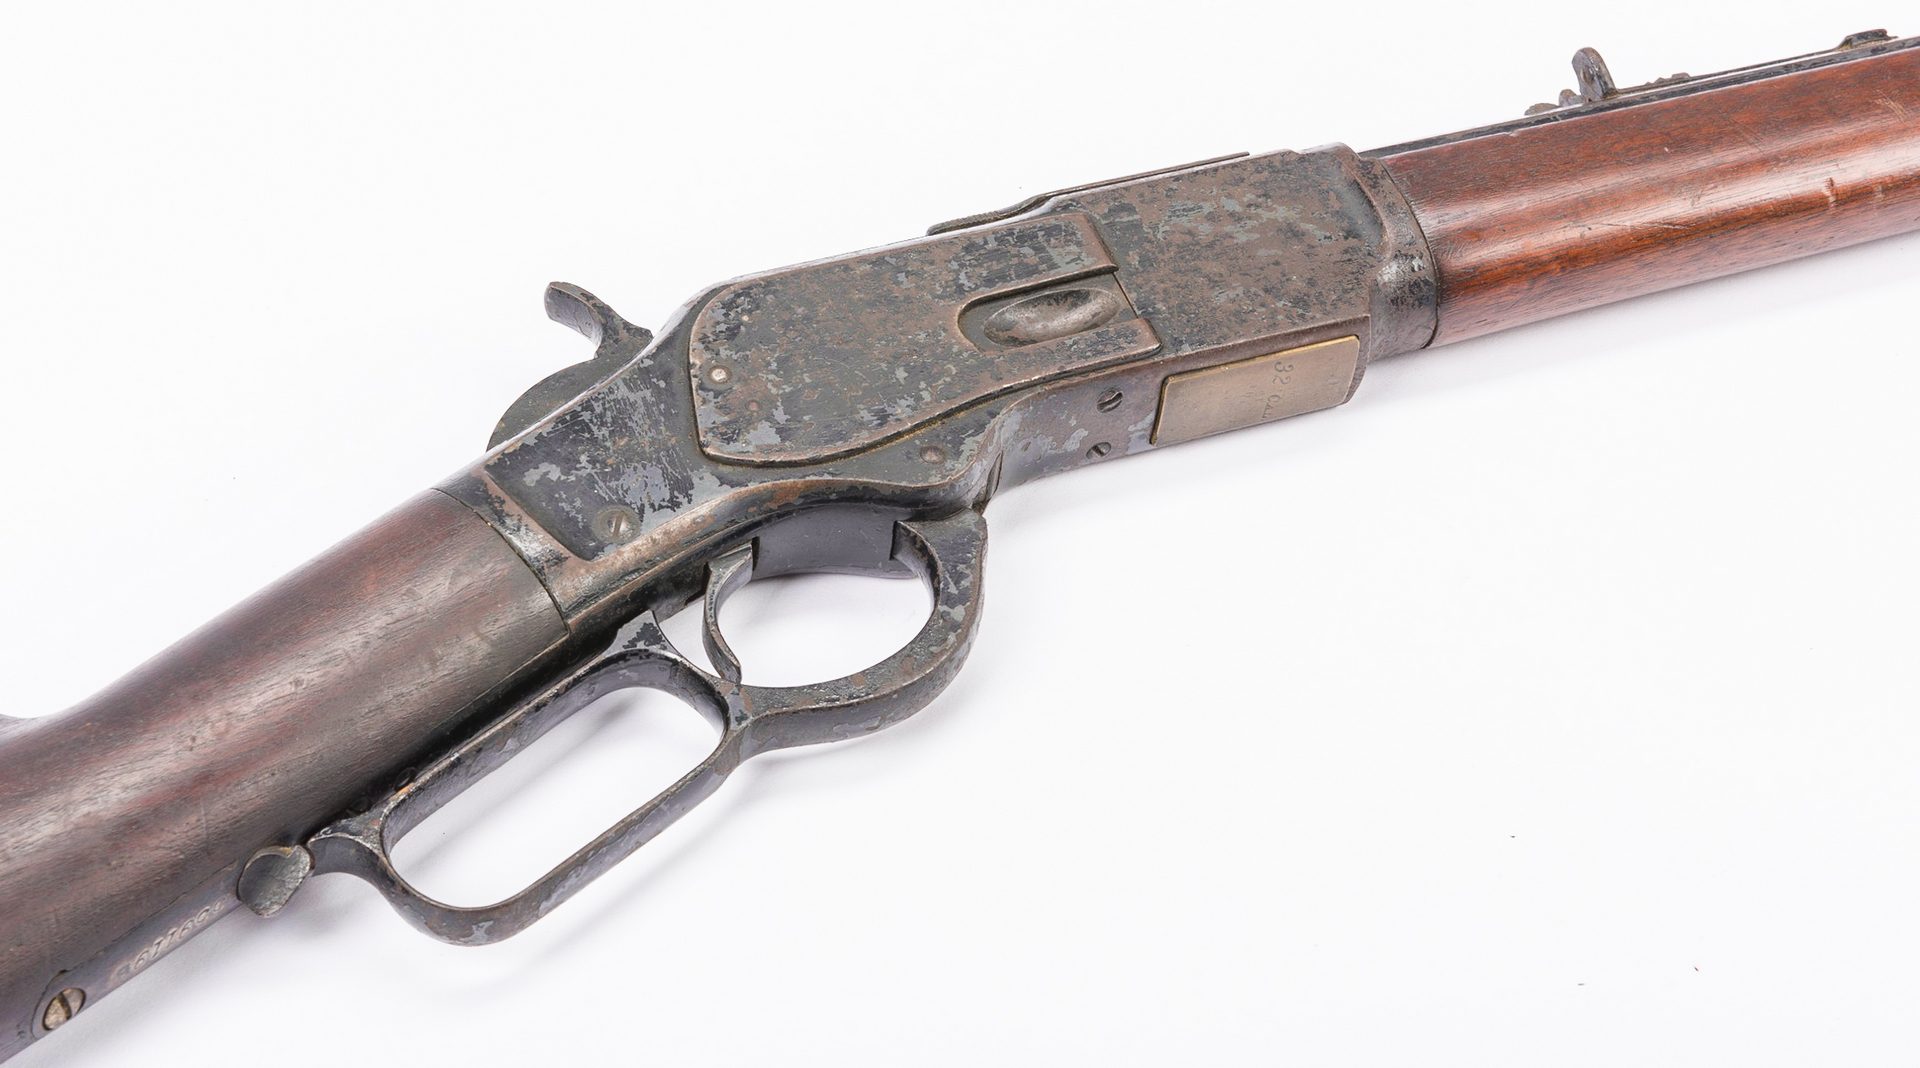 Lot 795: Winchester Model 1873, 32-20 Win Lever Action Rifle